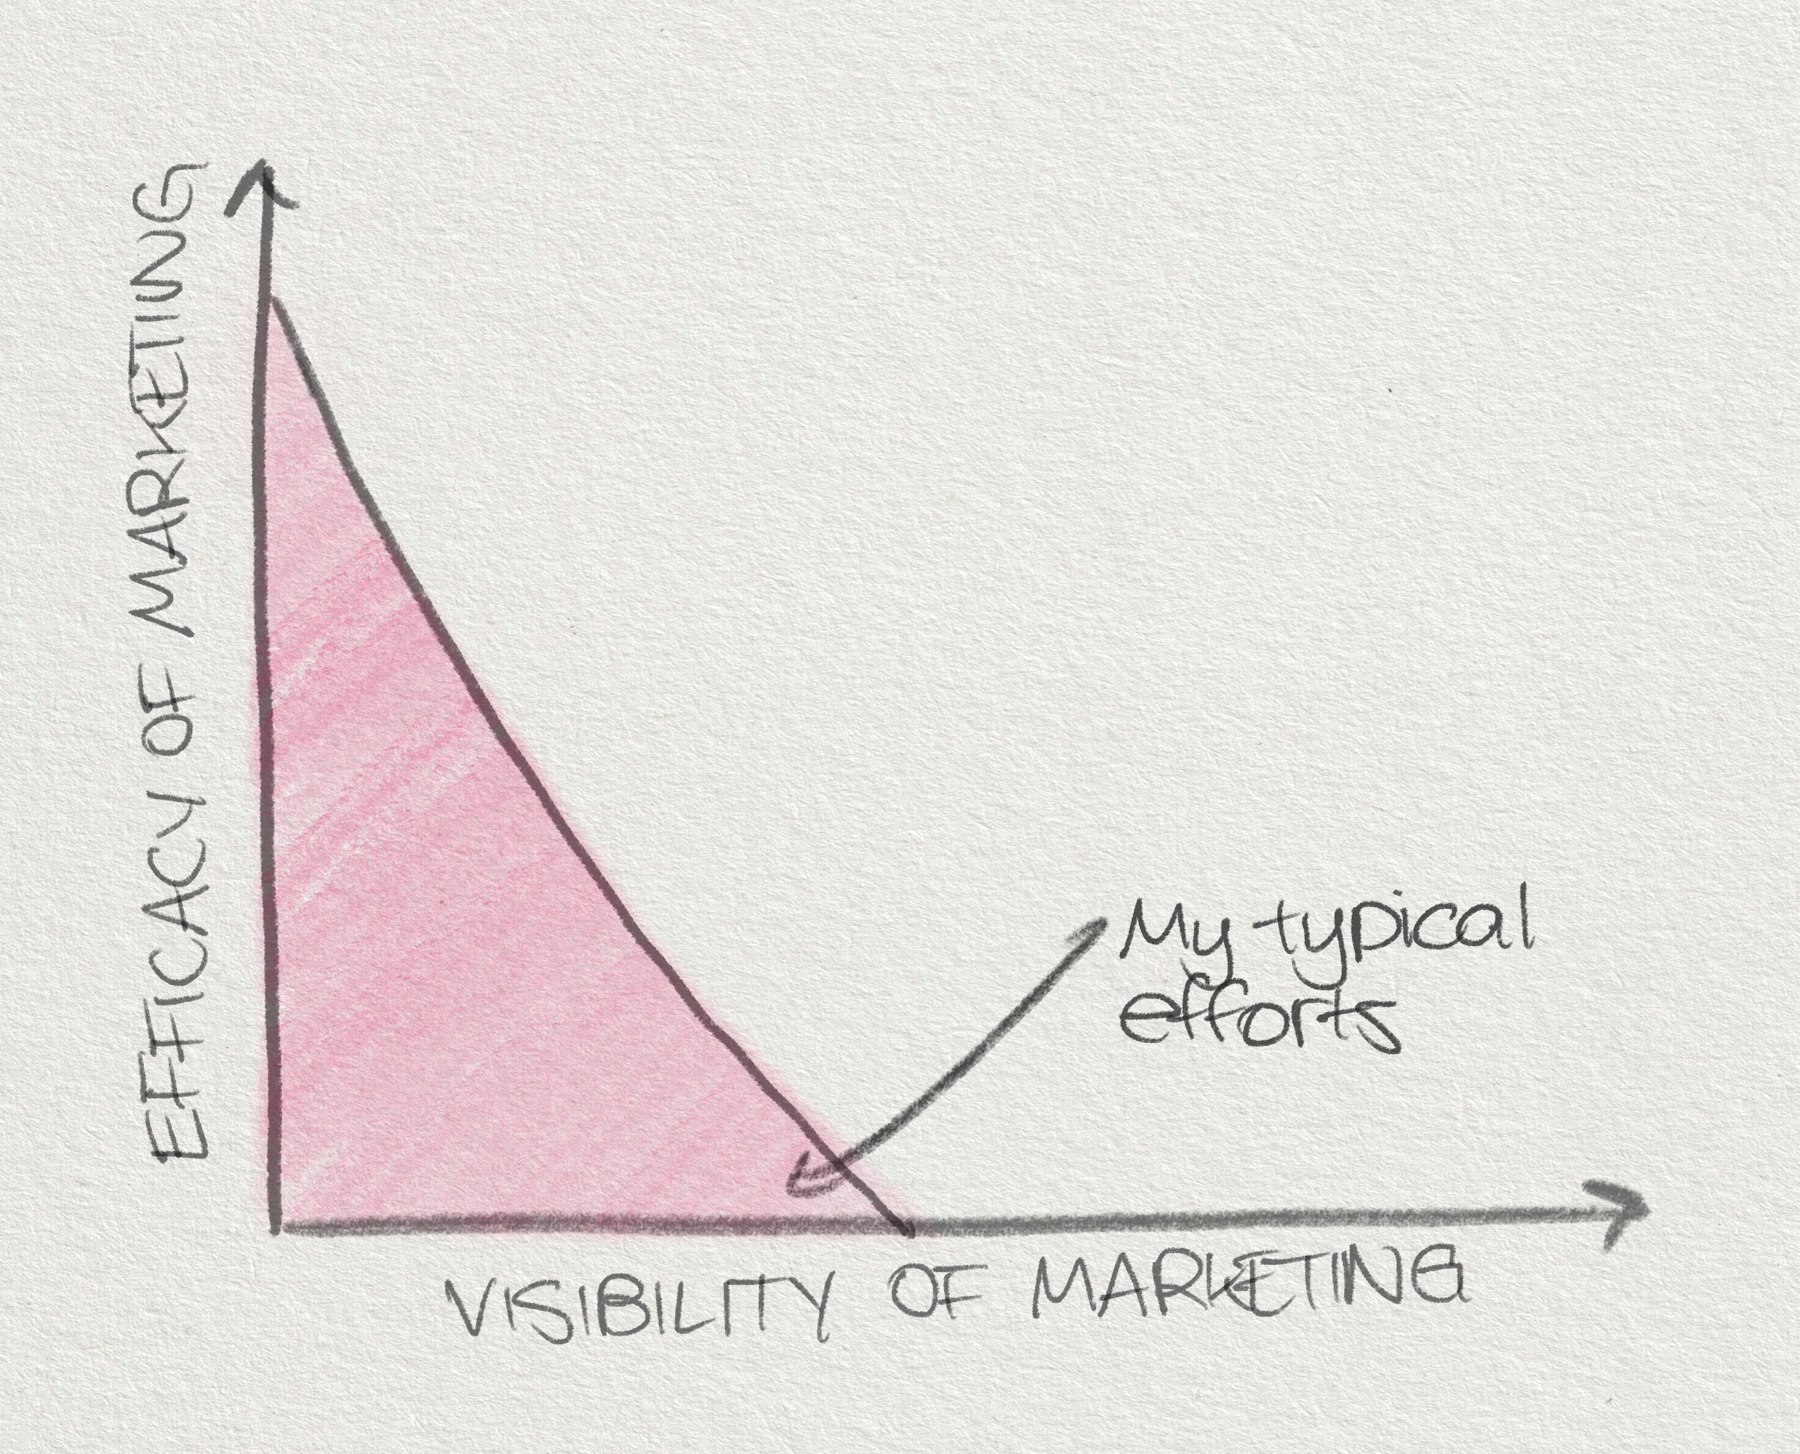 A graph where the efficacy of marketing decreases linearly with the visibility of it.